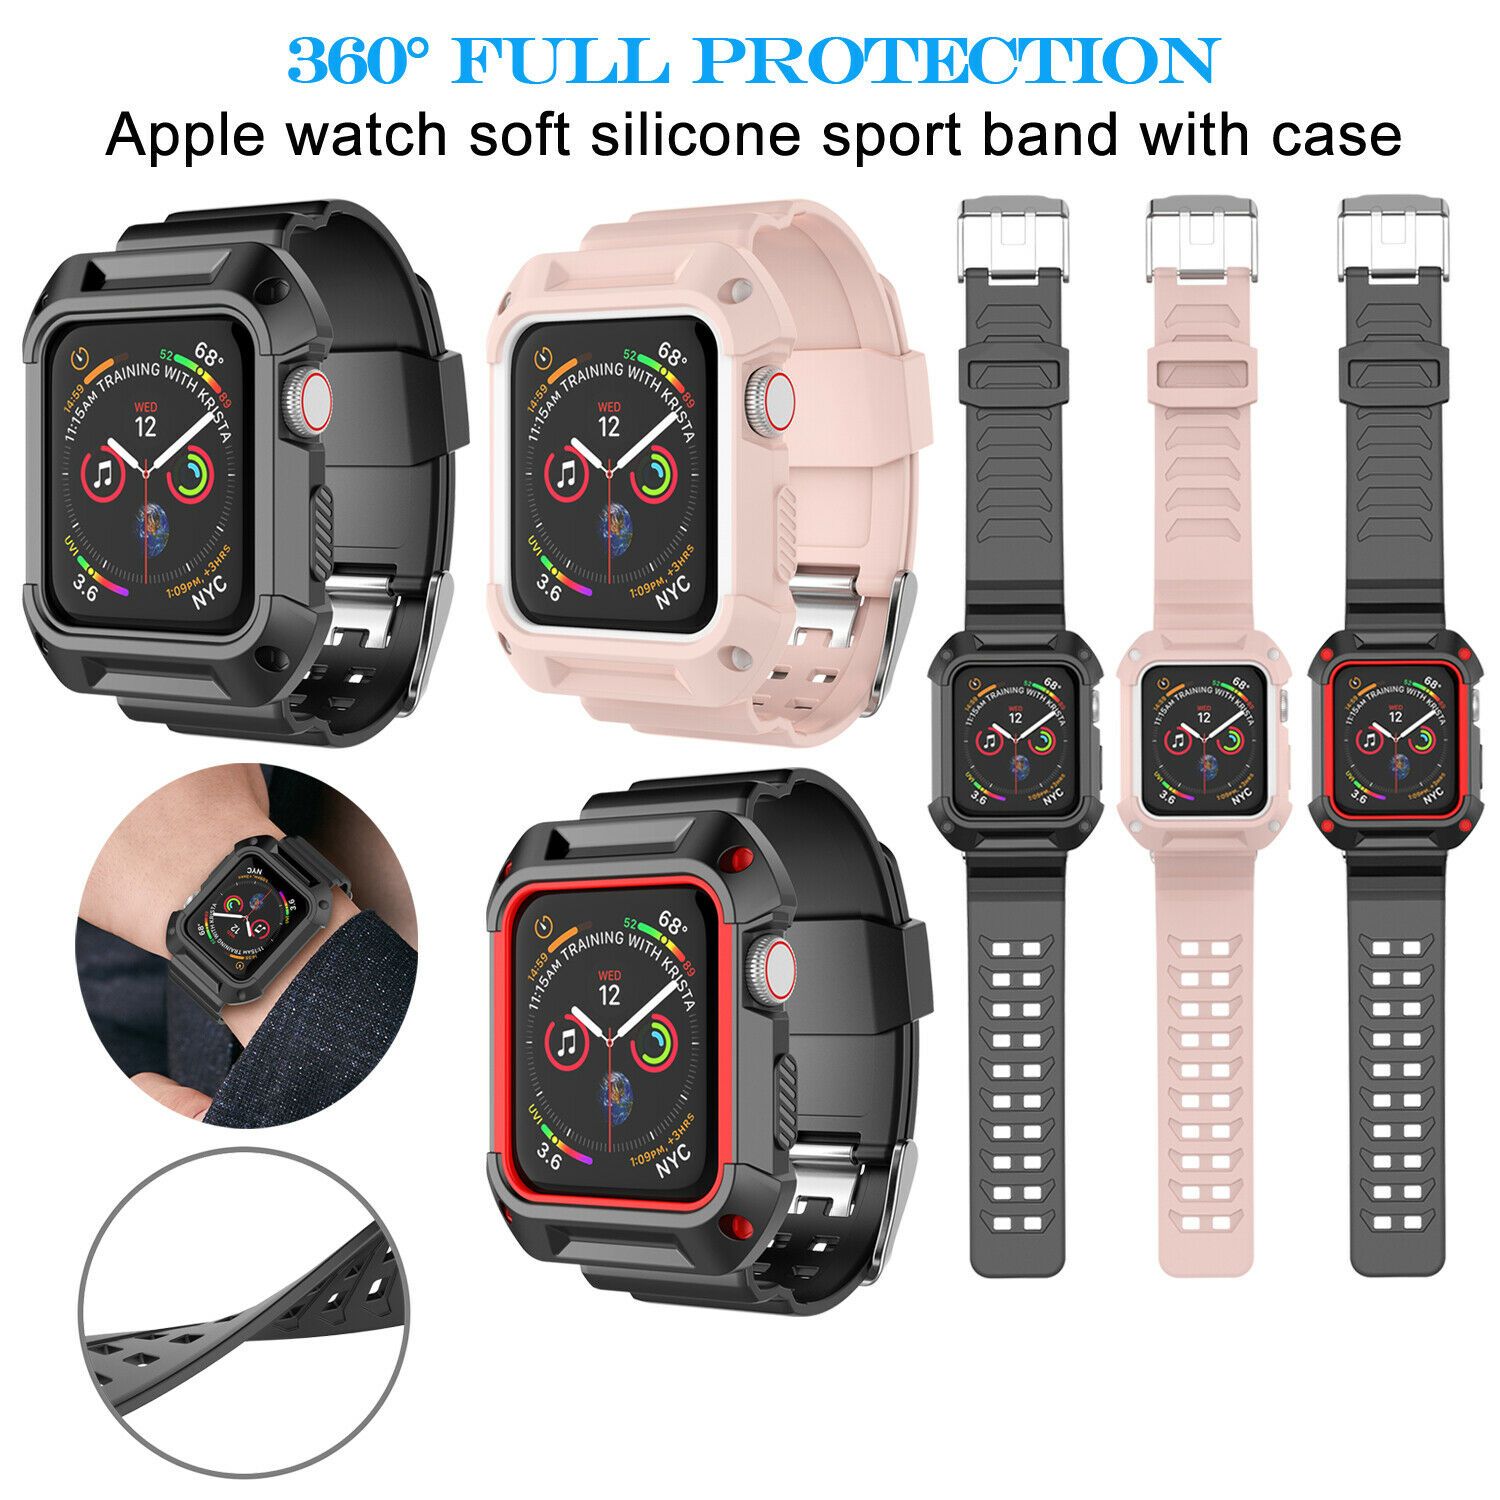 Silicone Sport Band Strap+Case for Apple Watch Series 5/4/3/2/1 42/38/40/44mm ebizware 